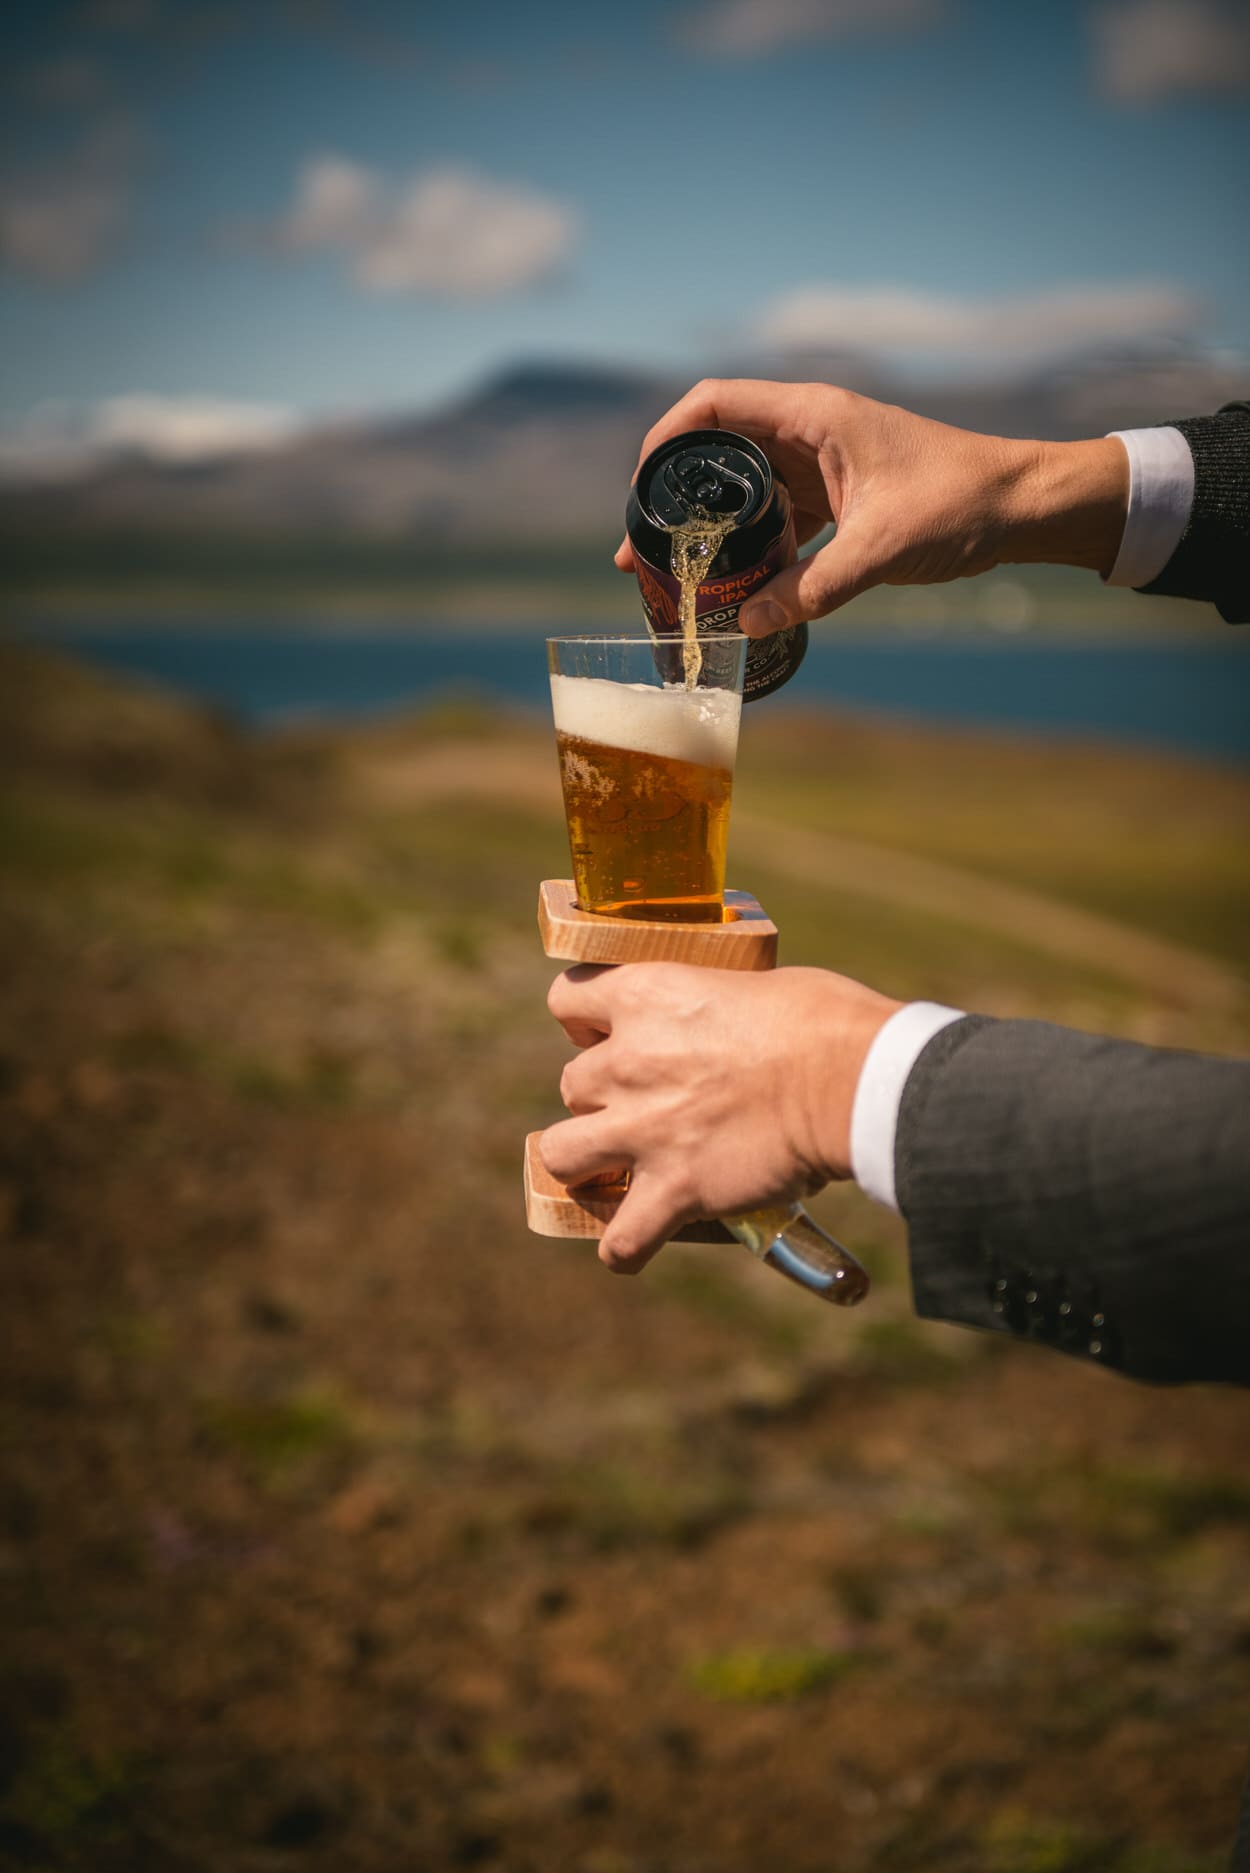 Drop bear beer being poured in a glass horn for a ceremony in Iceland